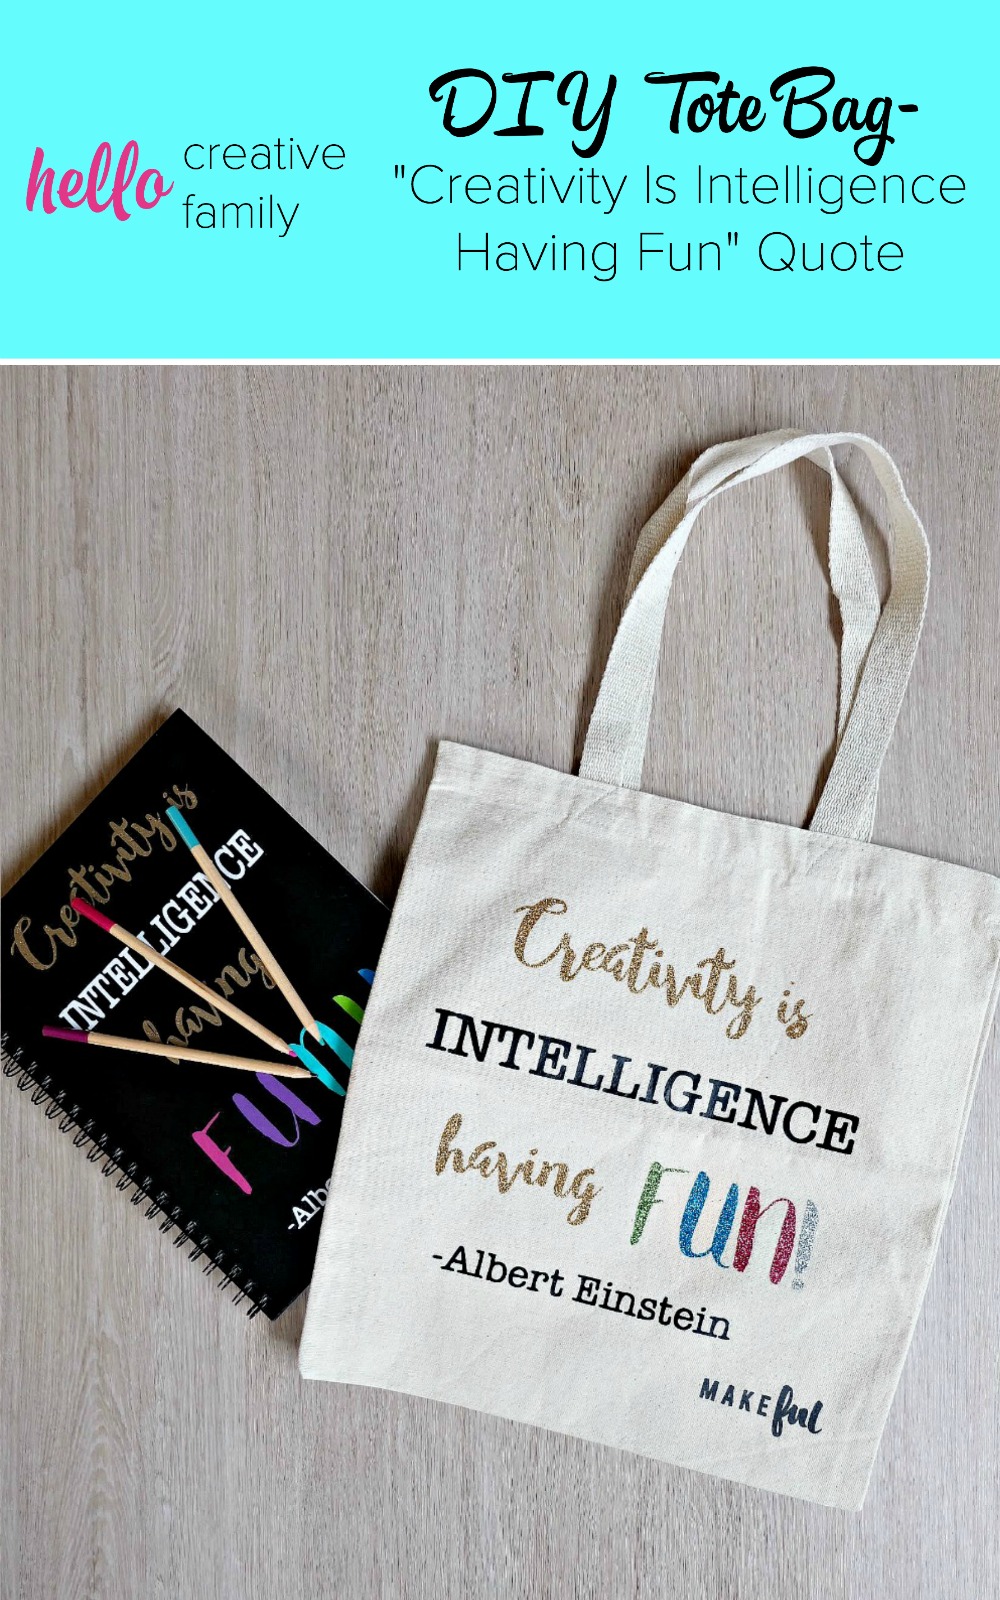 The perfect handmade gift idea for any creative person! This "Creativity is intelligence having fun" quote from Albert Einstein is cut using the Cricut Explore. Such a fun DIY Tote Bag and a fun cricut explore project. 